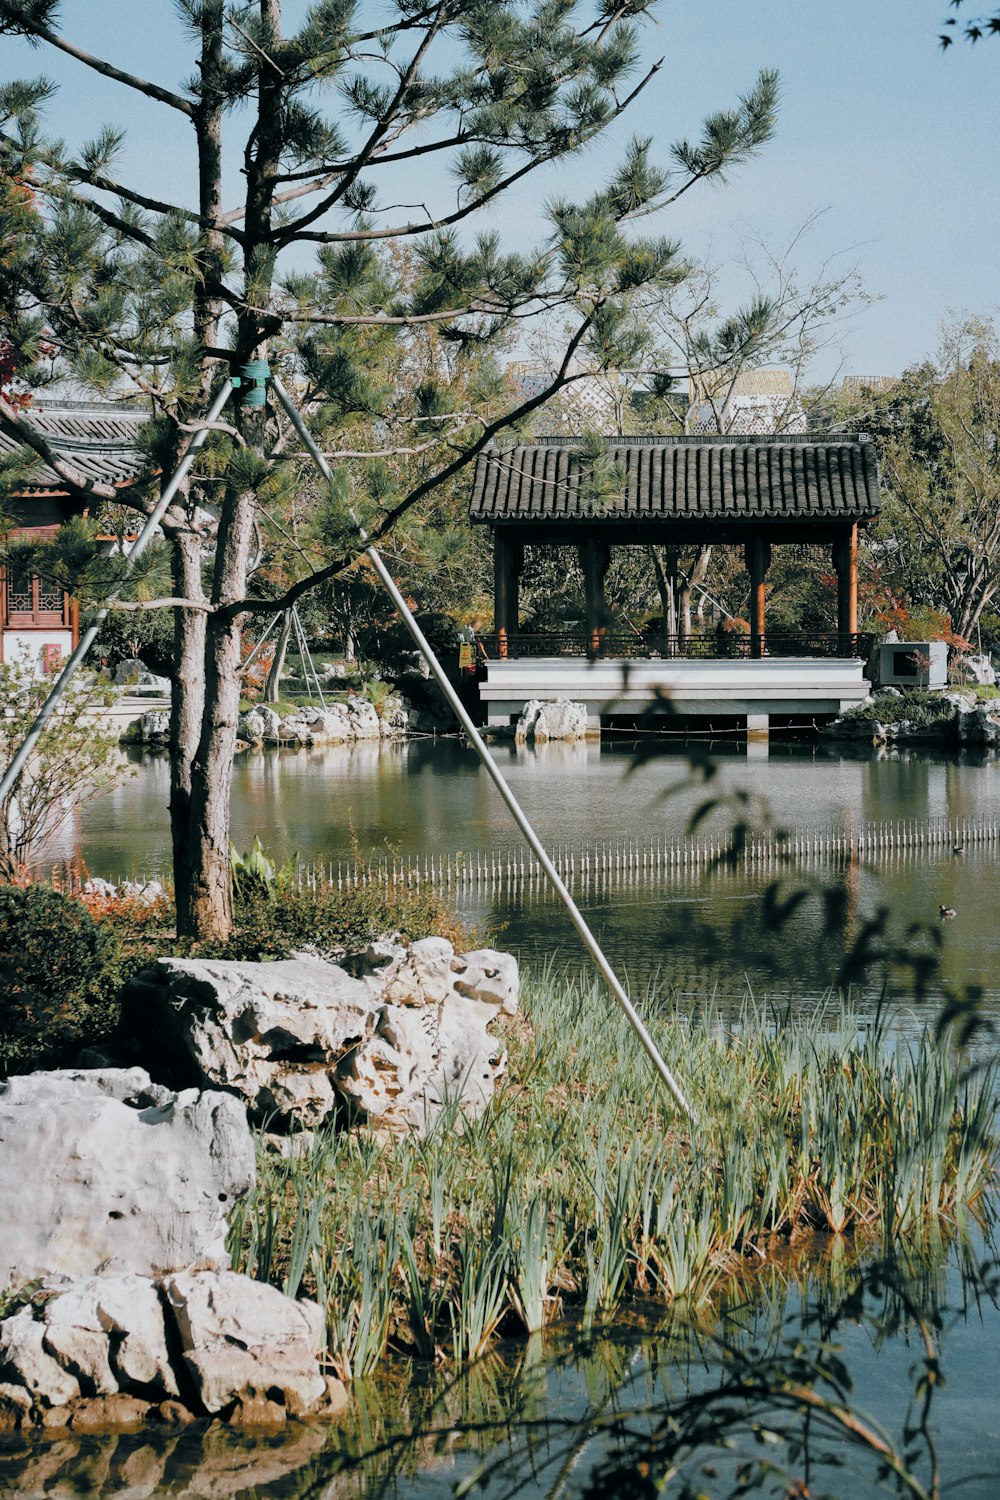 a pond in a park with a pavilion in the background